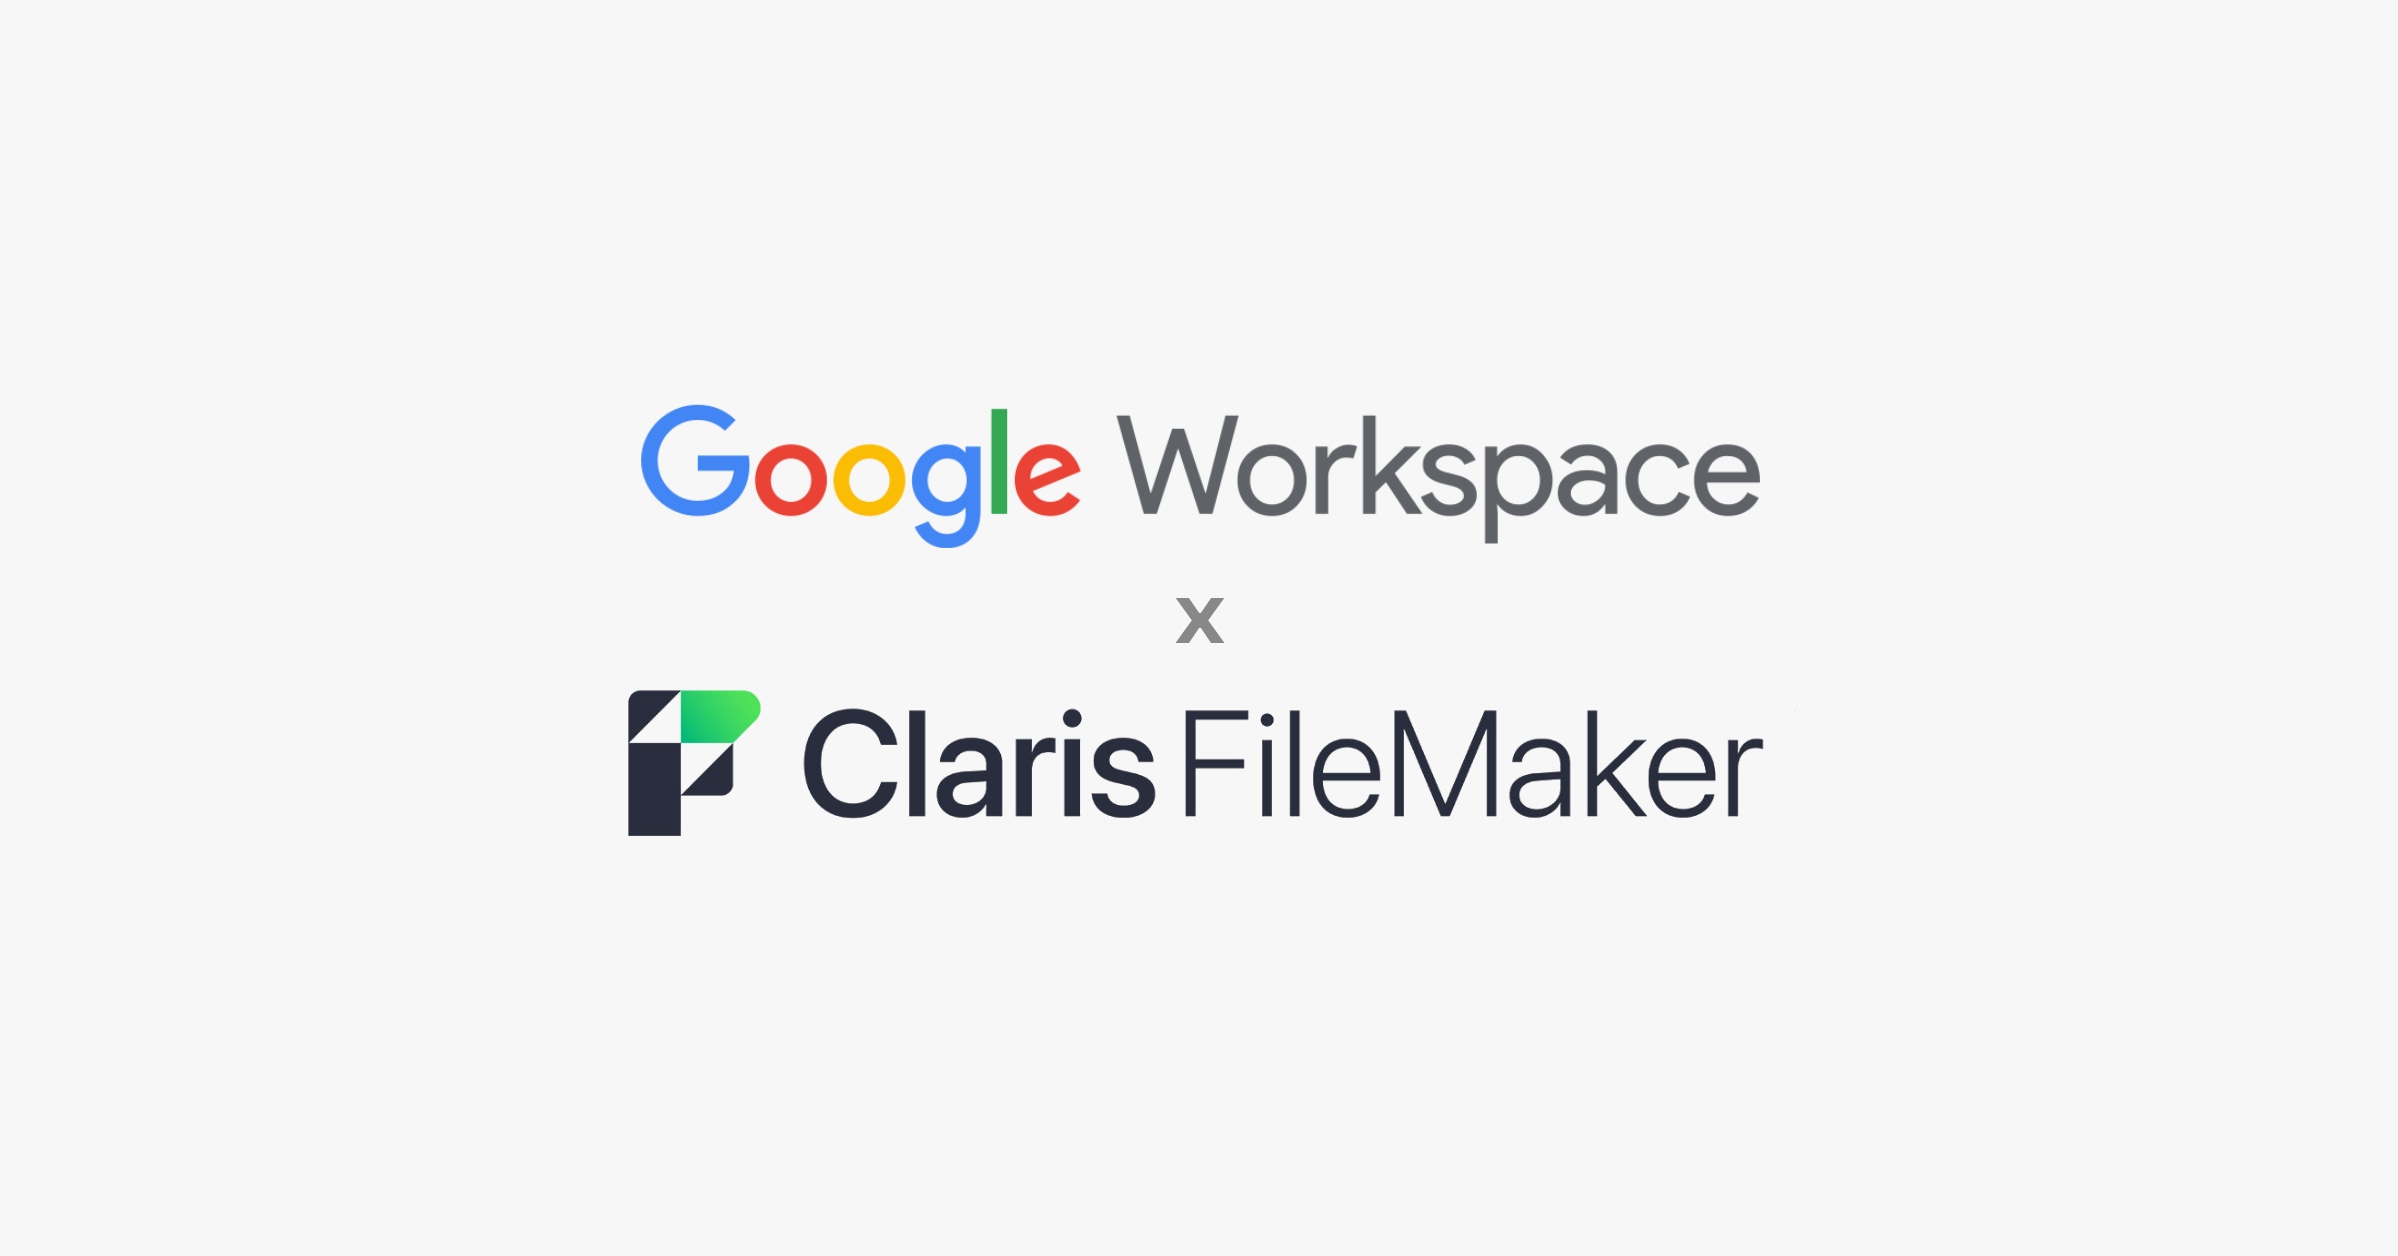 Group-based OAuth in FileMaker using Google Workspace